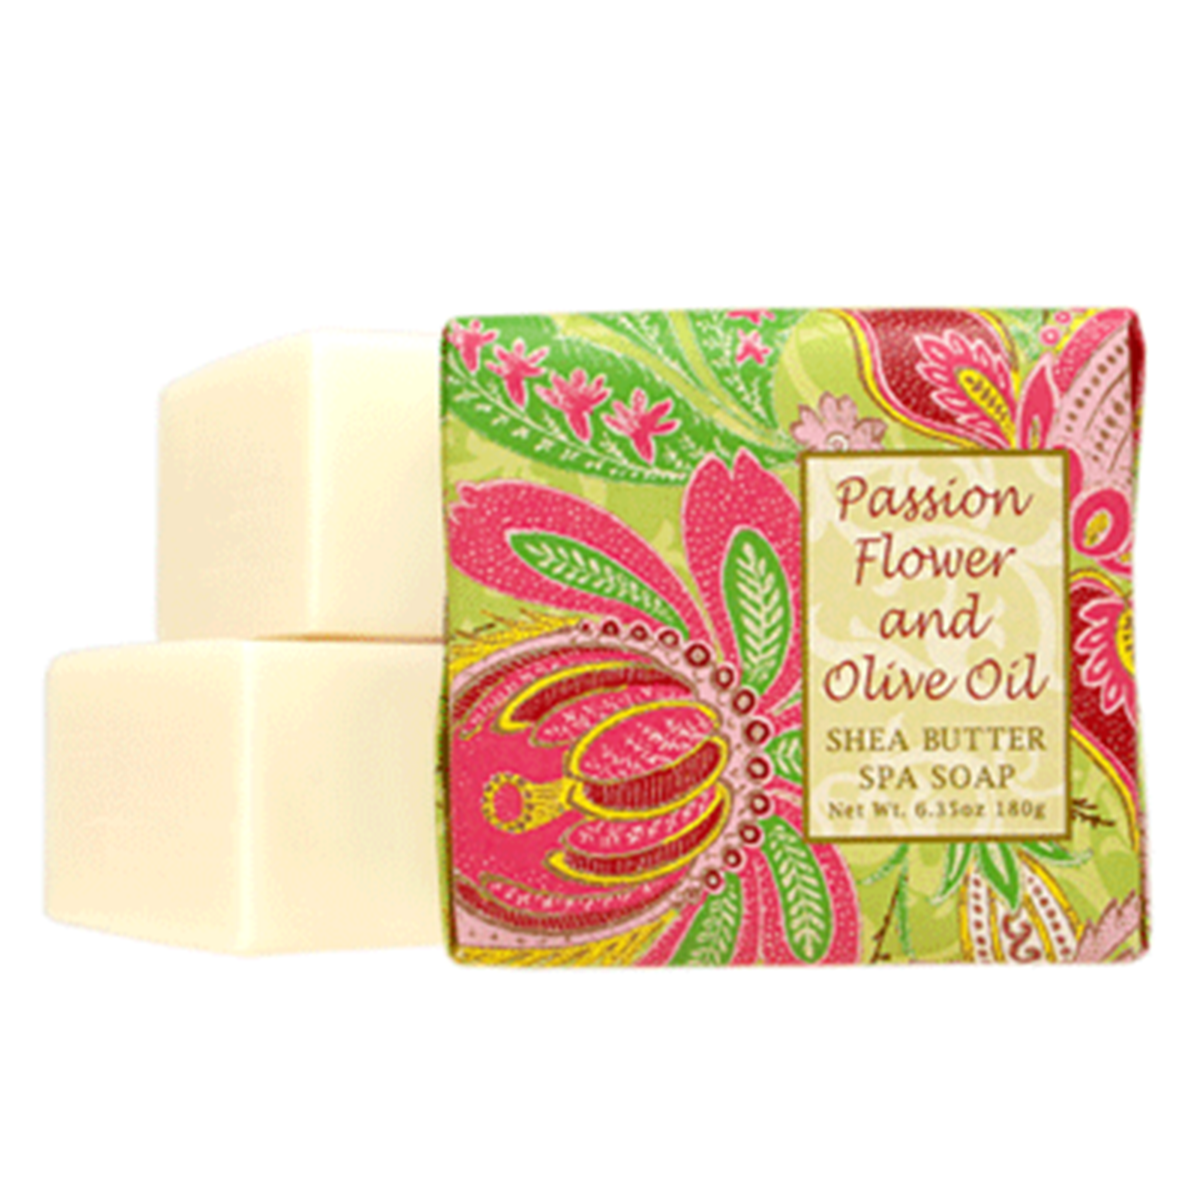 Passion Flower and Olive Oil Shea Butter Soap